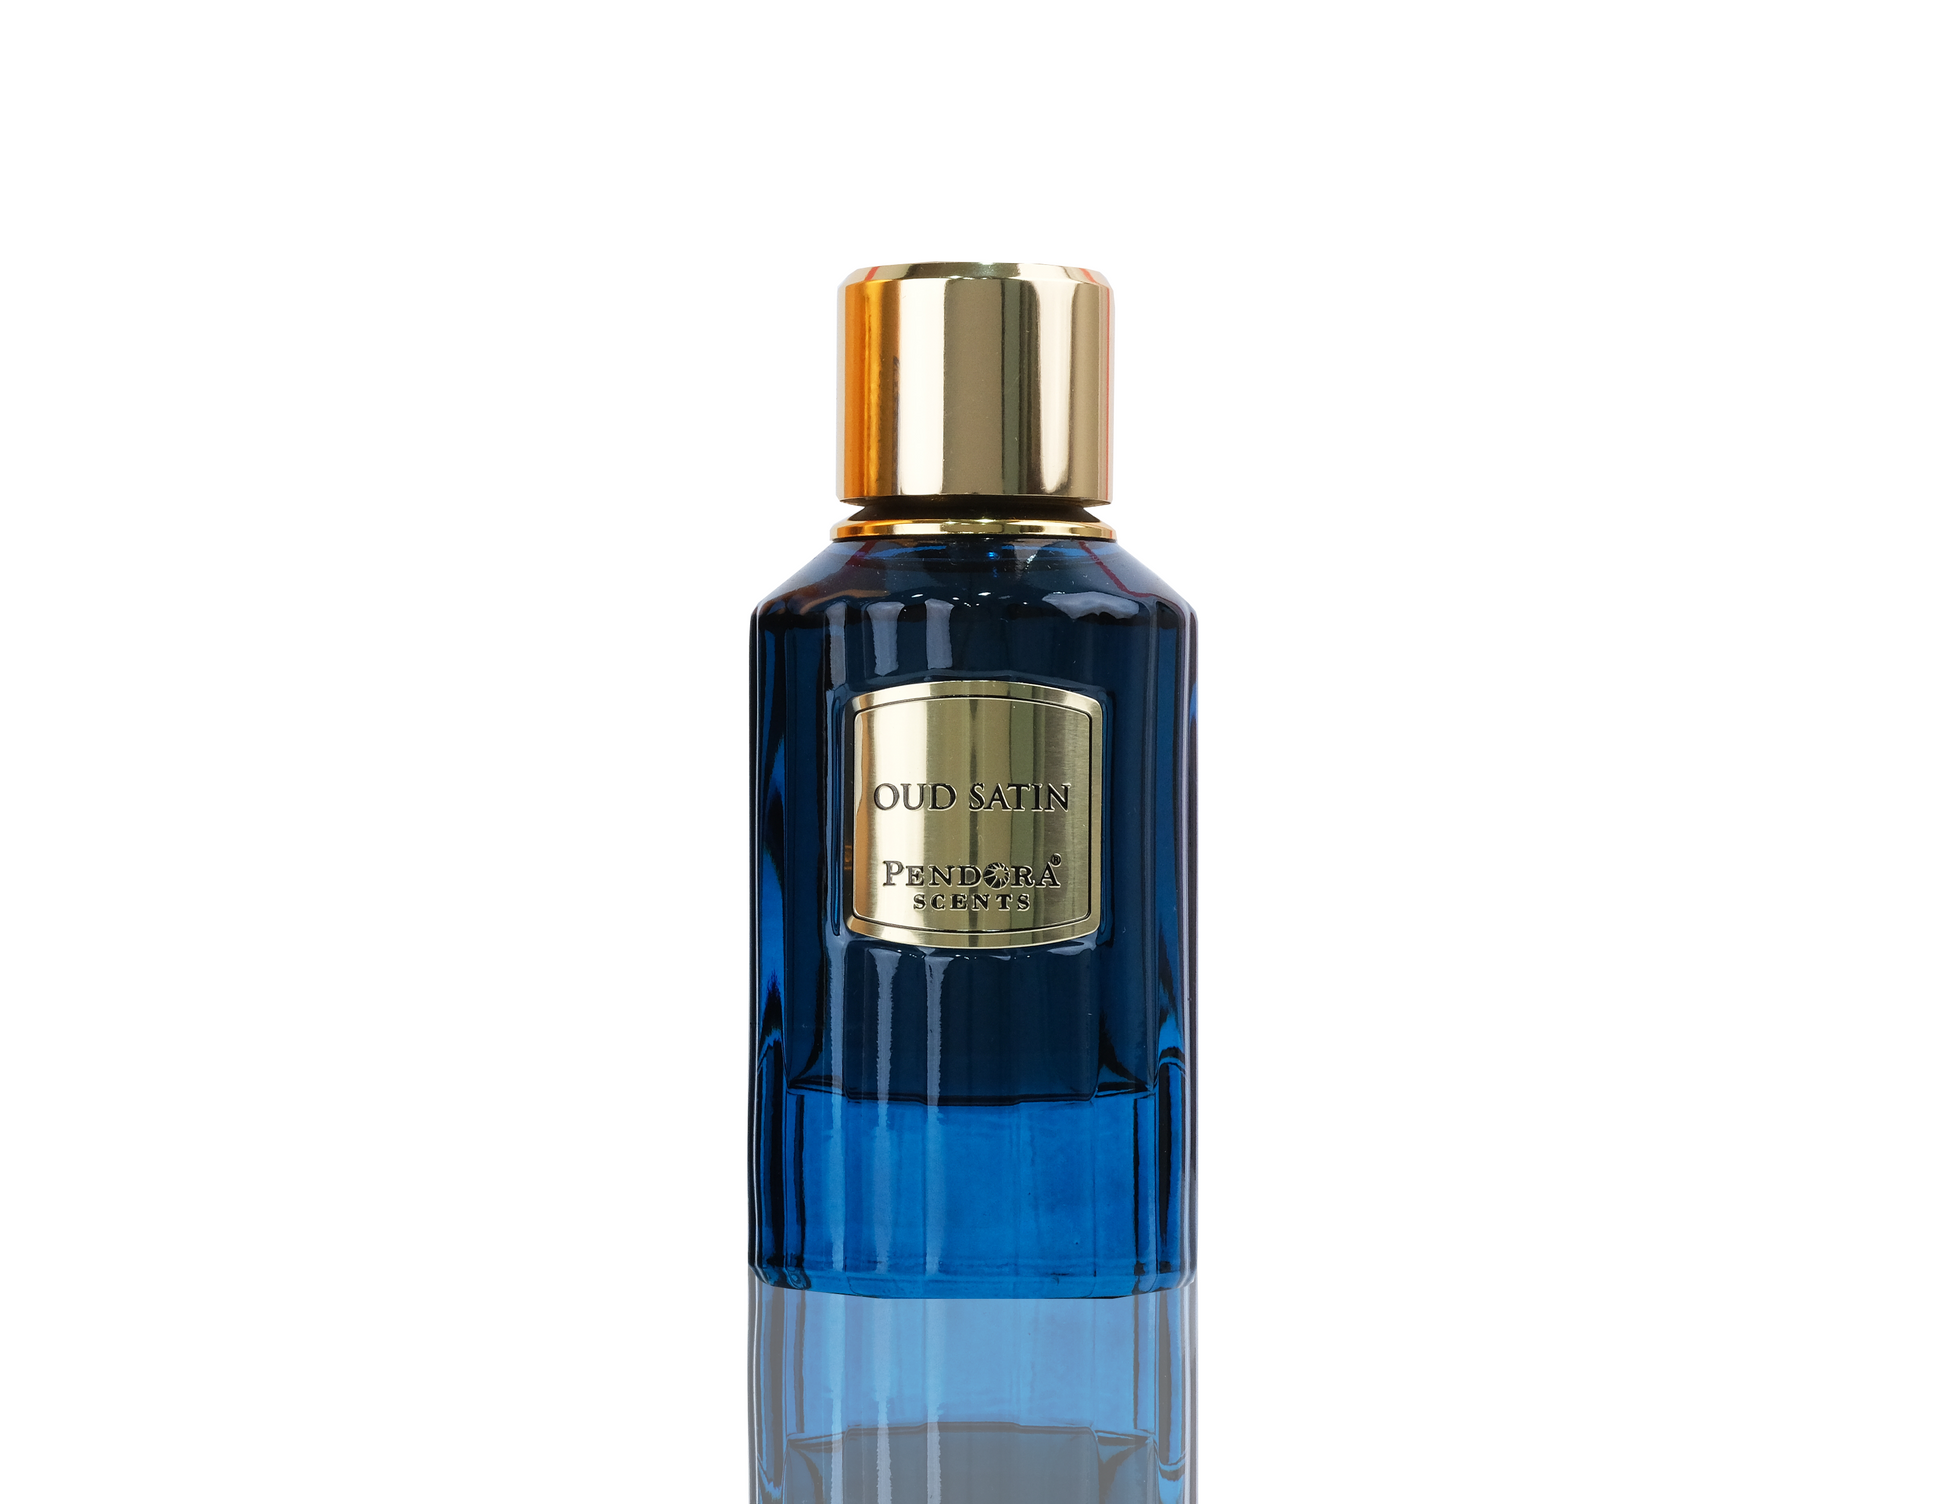  OUD SATIN 50ml fragrance - MINISTRY OF OUD